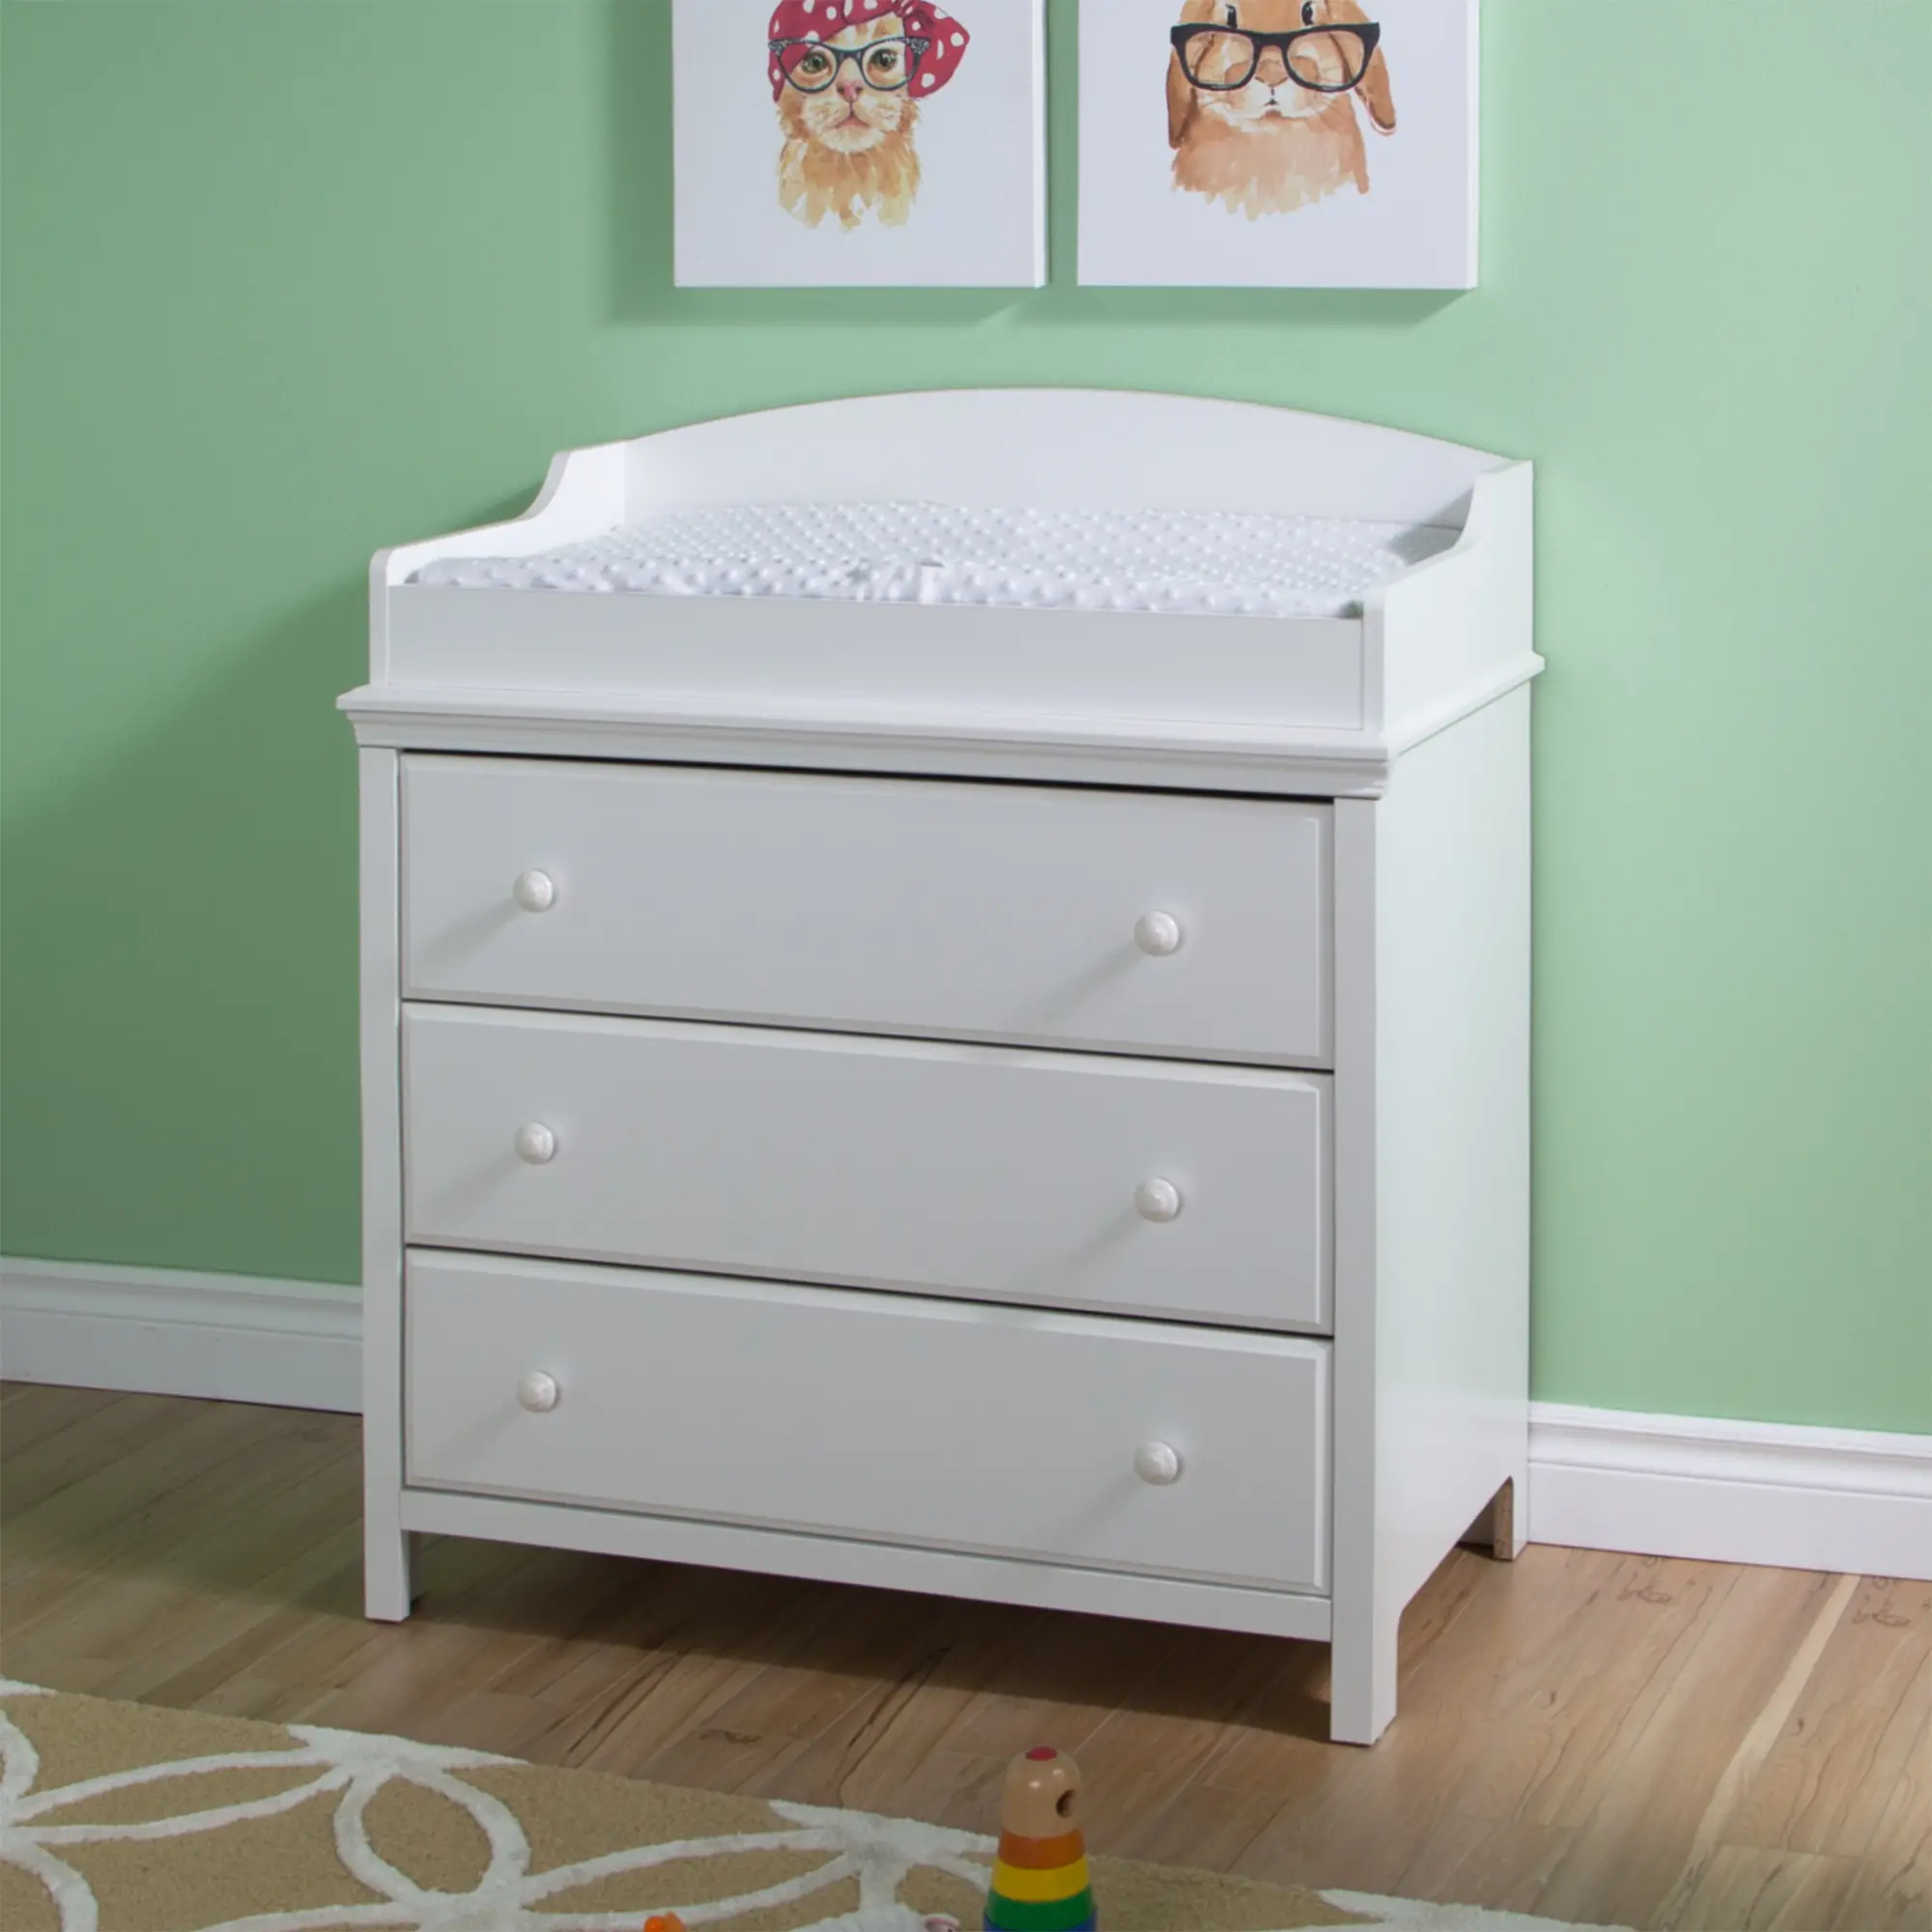 Cotton Candy White Changing Table with Drawers - South Shore